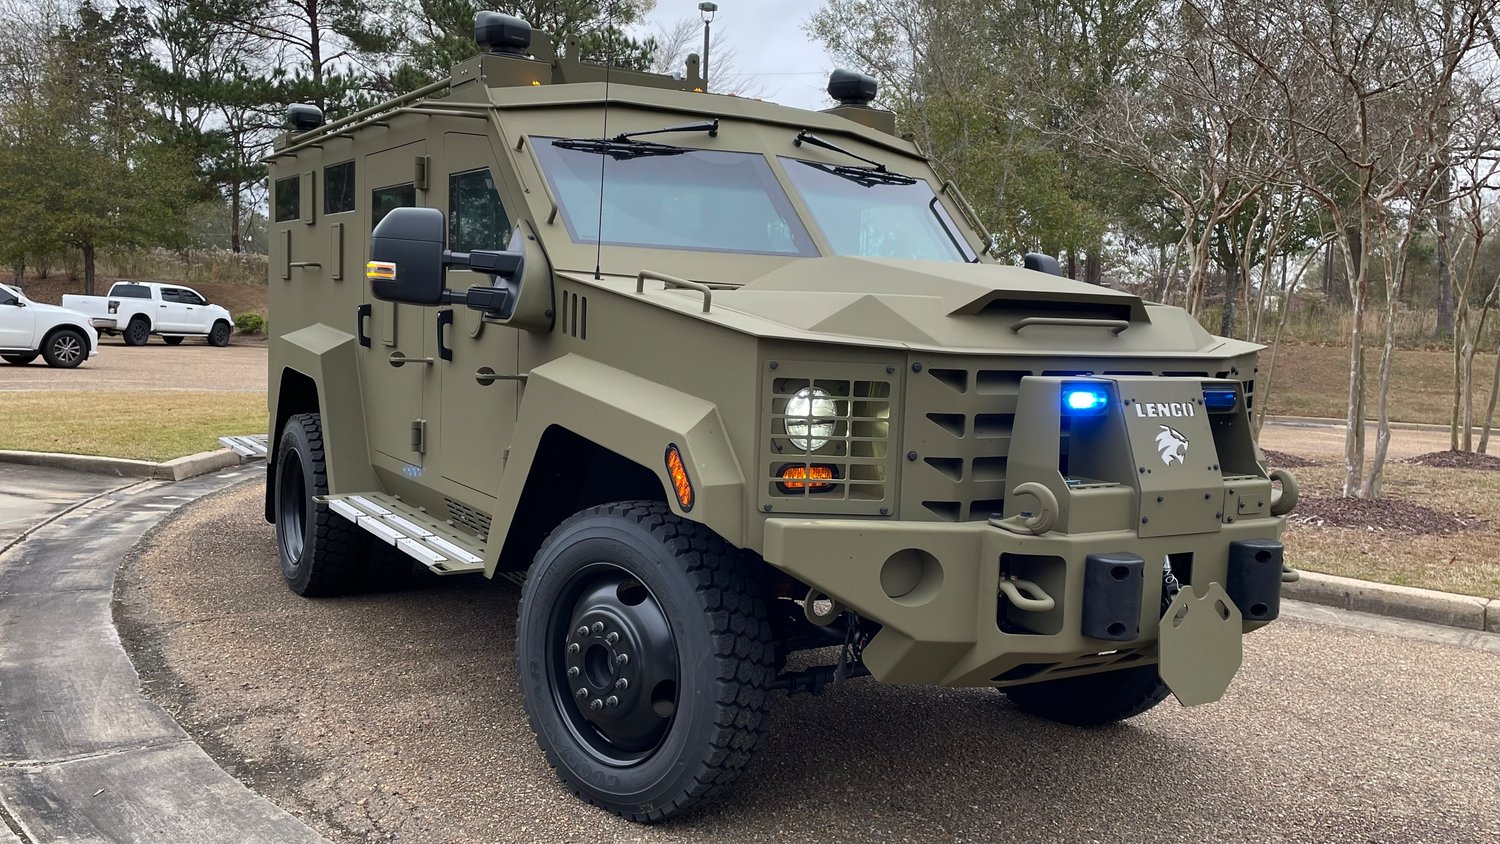 The Madison Police Department recently acquired a new Lenco armored vehicle.